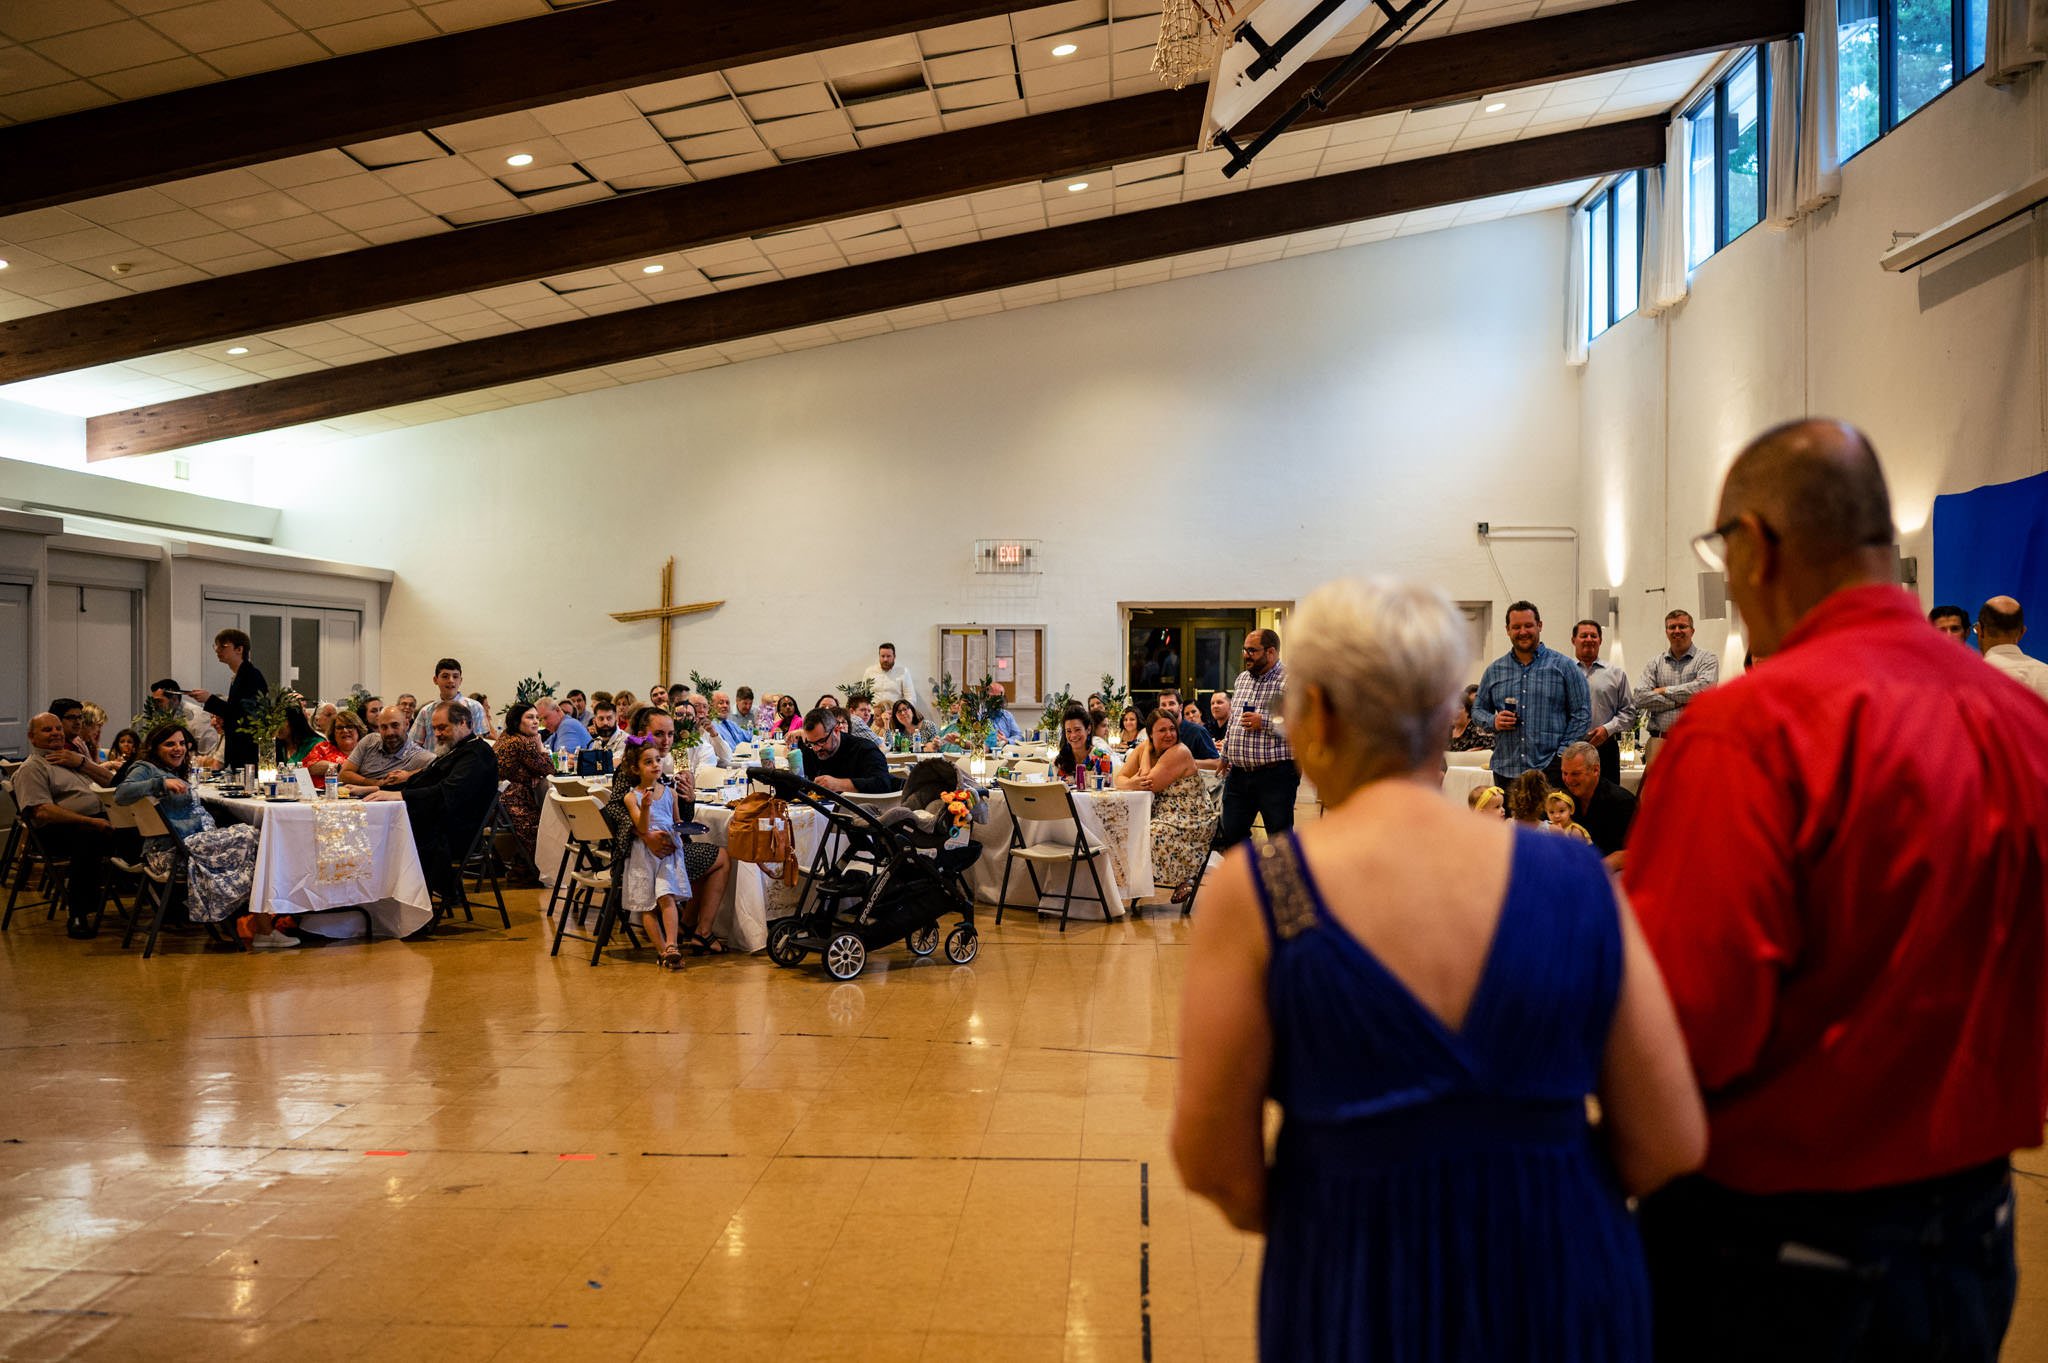 A group of people in a large room captured by a Raleigh NC wedding photographer.